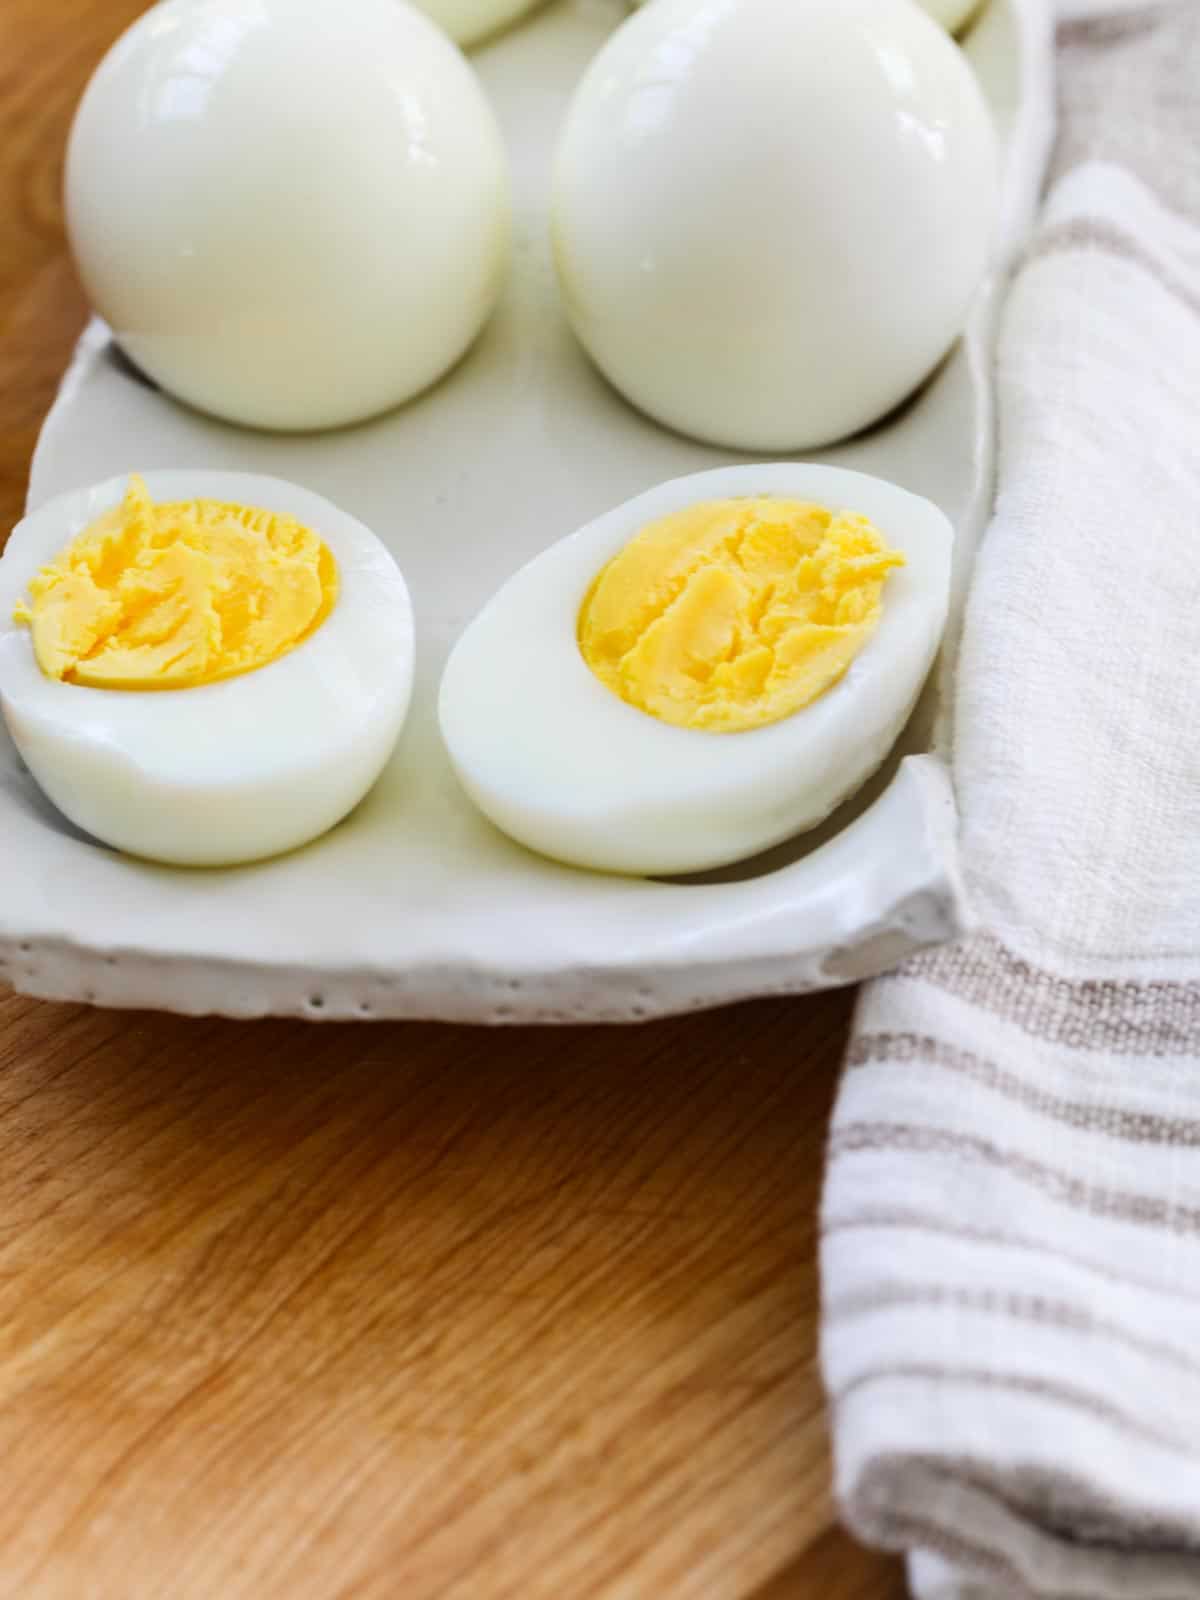 Boiled Eggs - Official Cook, Serve, Delicious Wiki